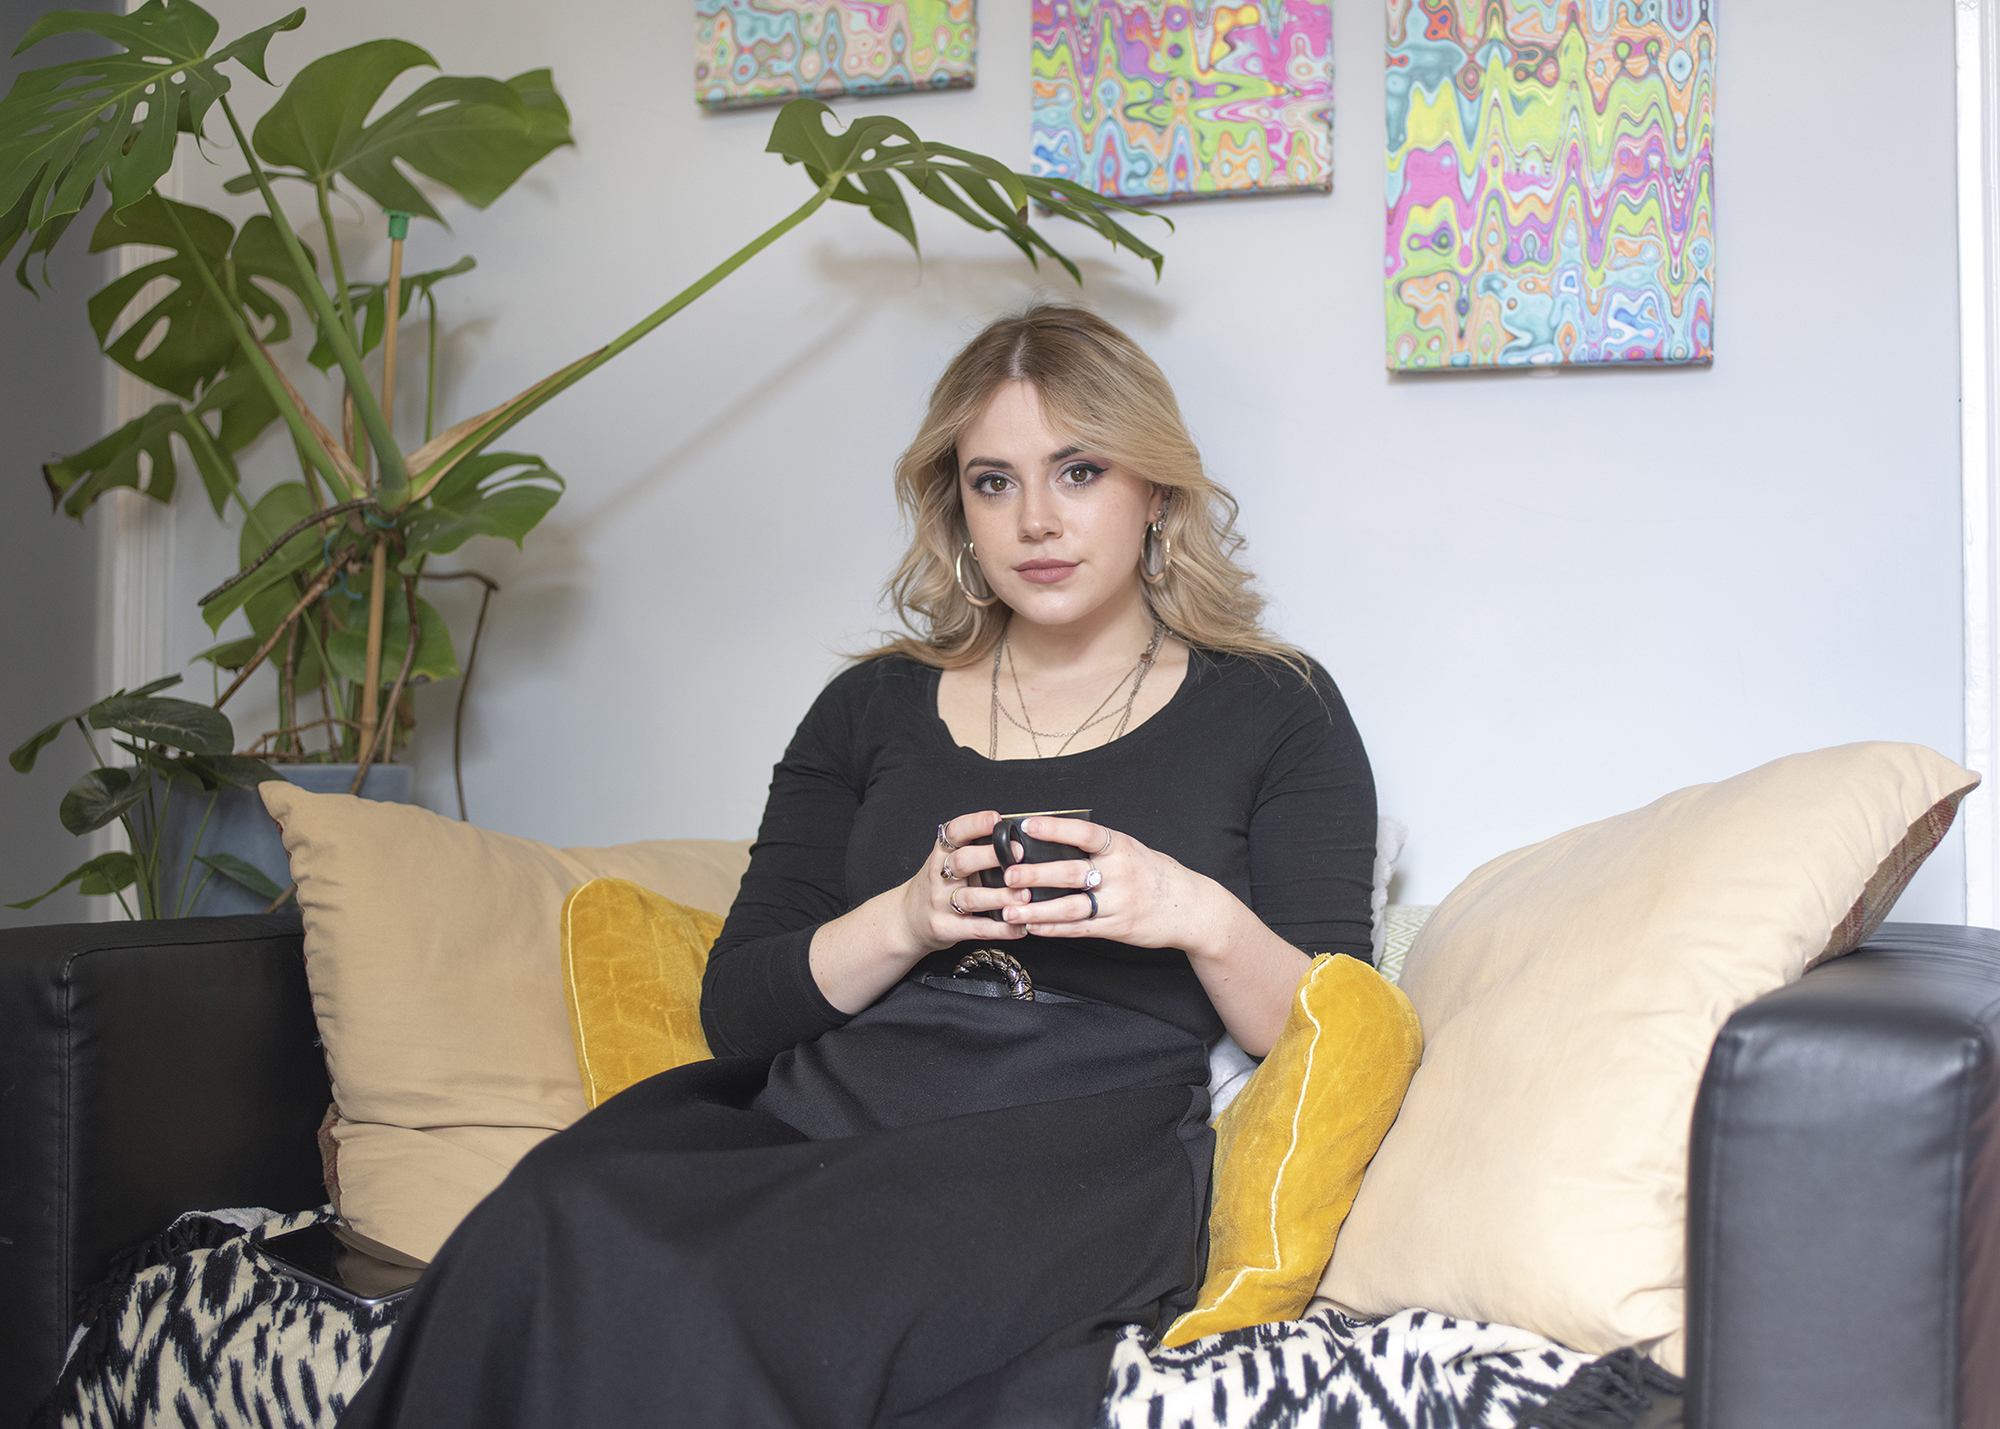 BA Photography work by Hannah Jayne showing a documentary style portrait of a blonde woman seated in her living room surrounded by plants and artwork.